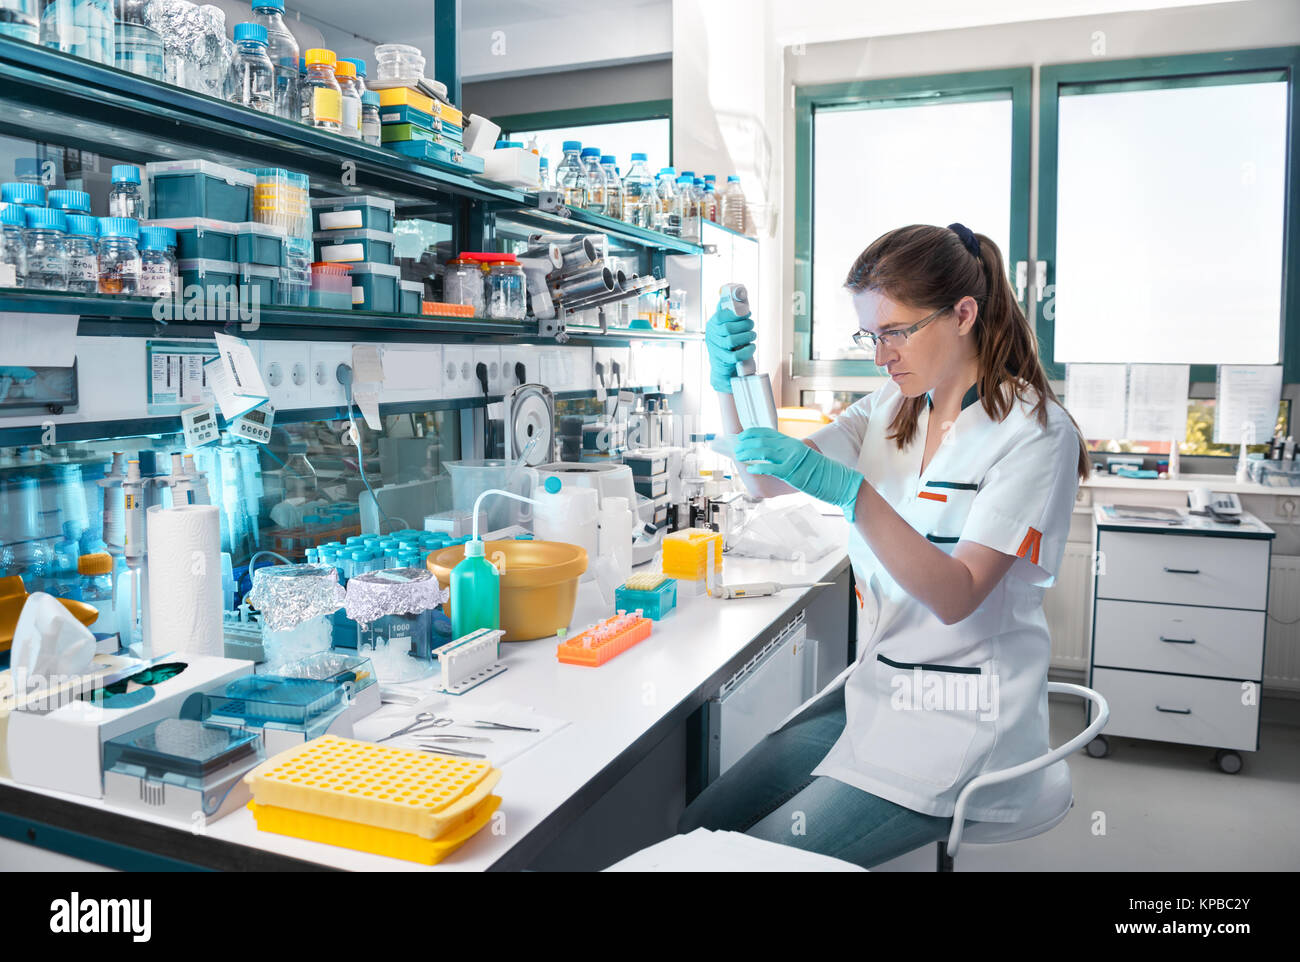 Young scientist works in modern biological lab, toned image Stock Photo